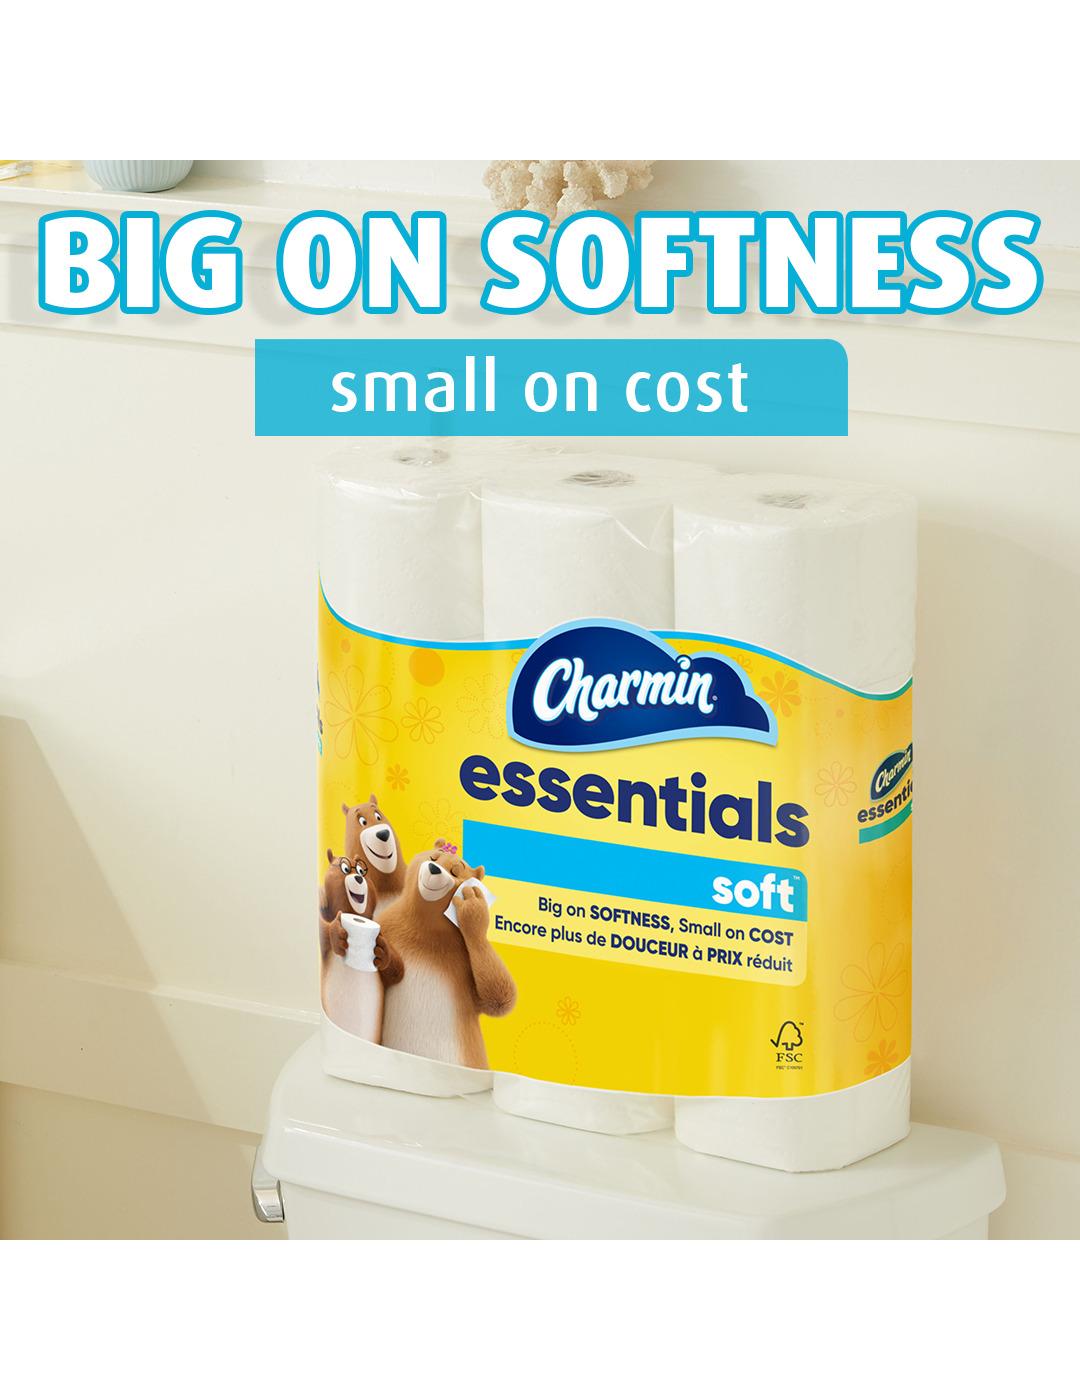 Charmin Essentials Soft Toilet Paper; image 5 of 13